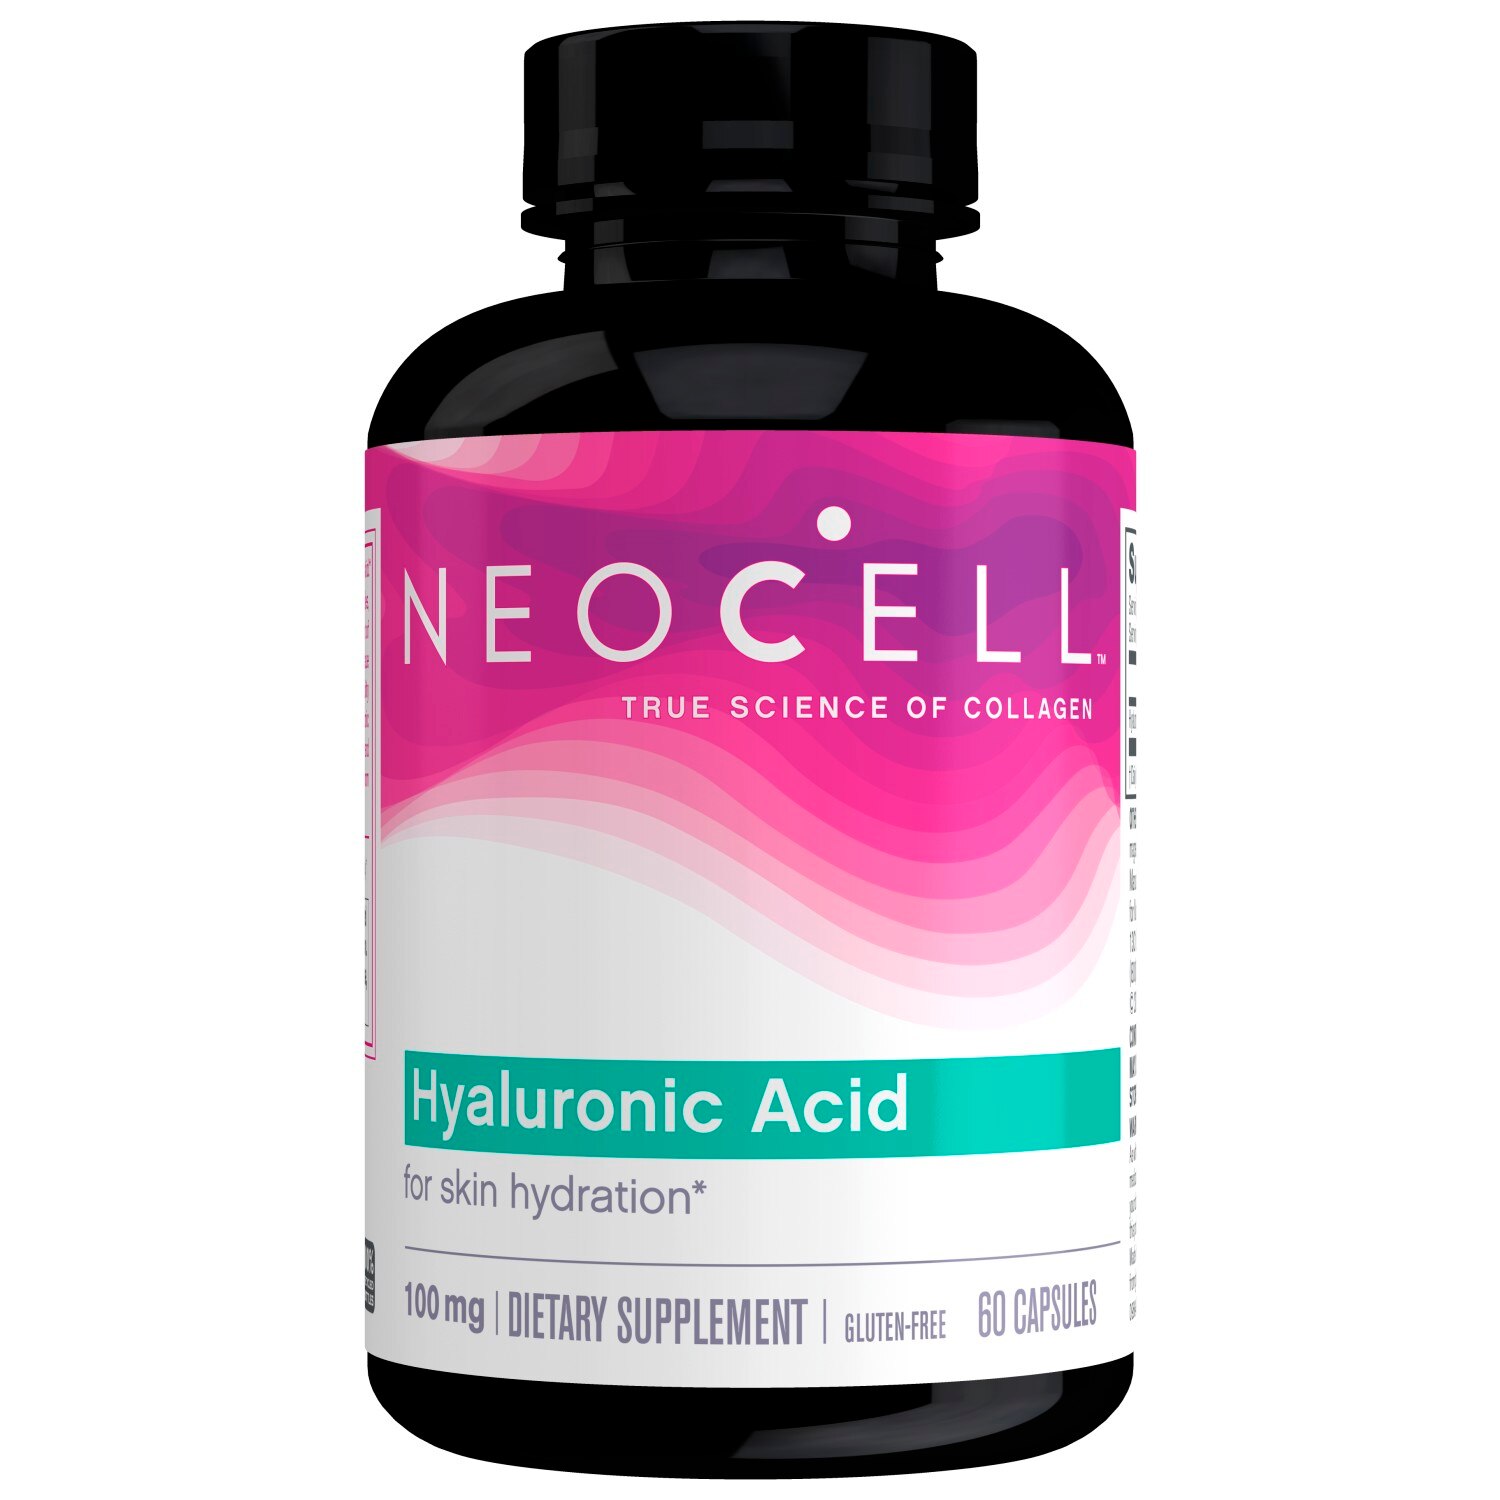 NeoCell Hyaluronic Acid for Skin Hydration*, 60 CT